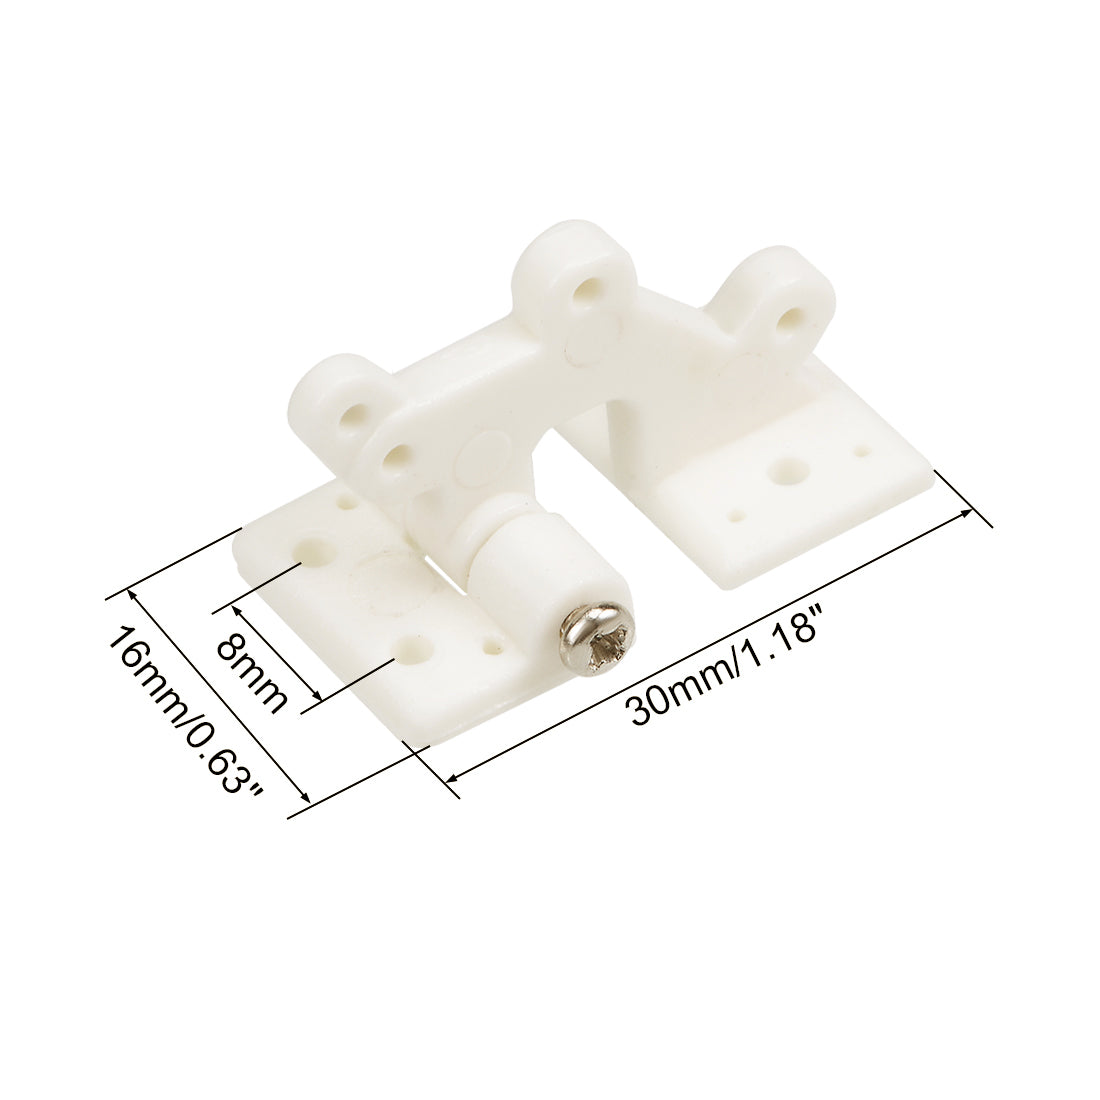 uxcell Uxcell RC Hinges Adjustable Hatch Hinge L30 x W16 mm, for RC Model Airplane Parts White 10pcs